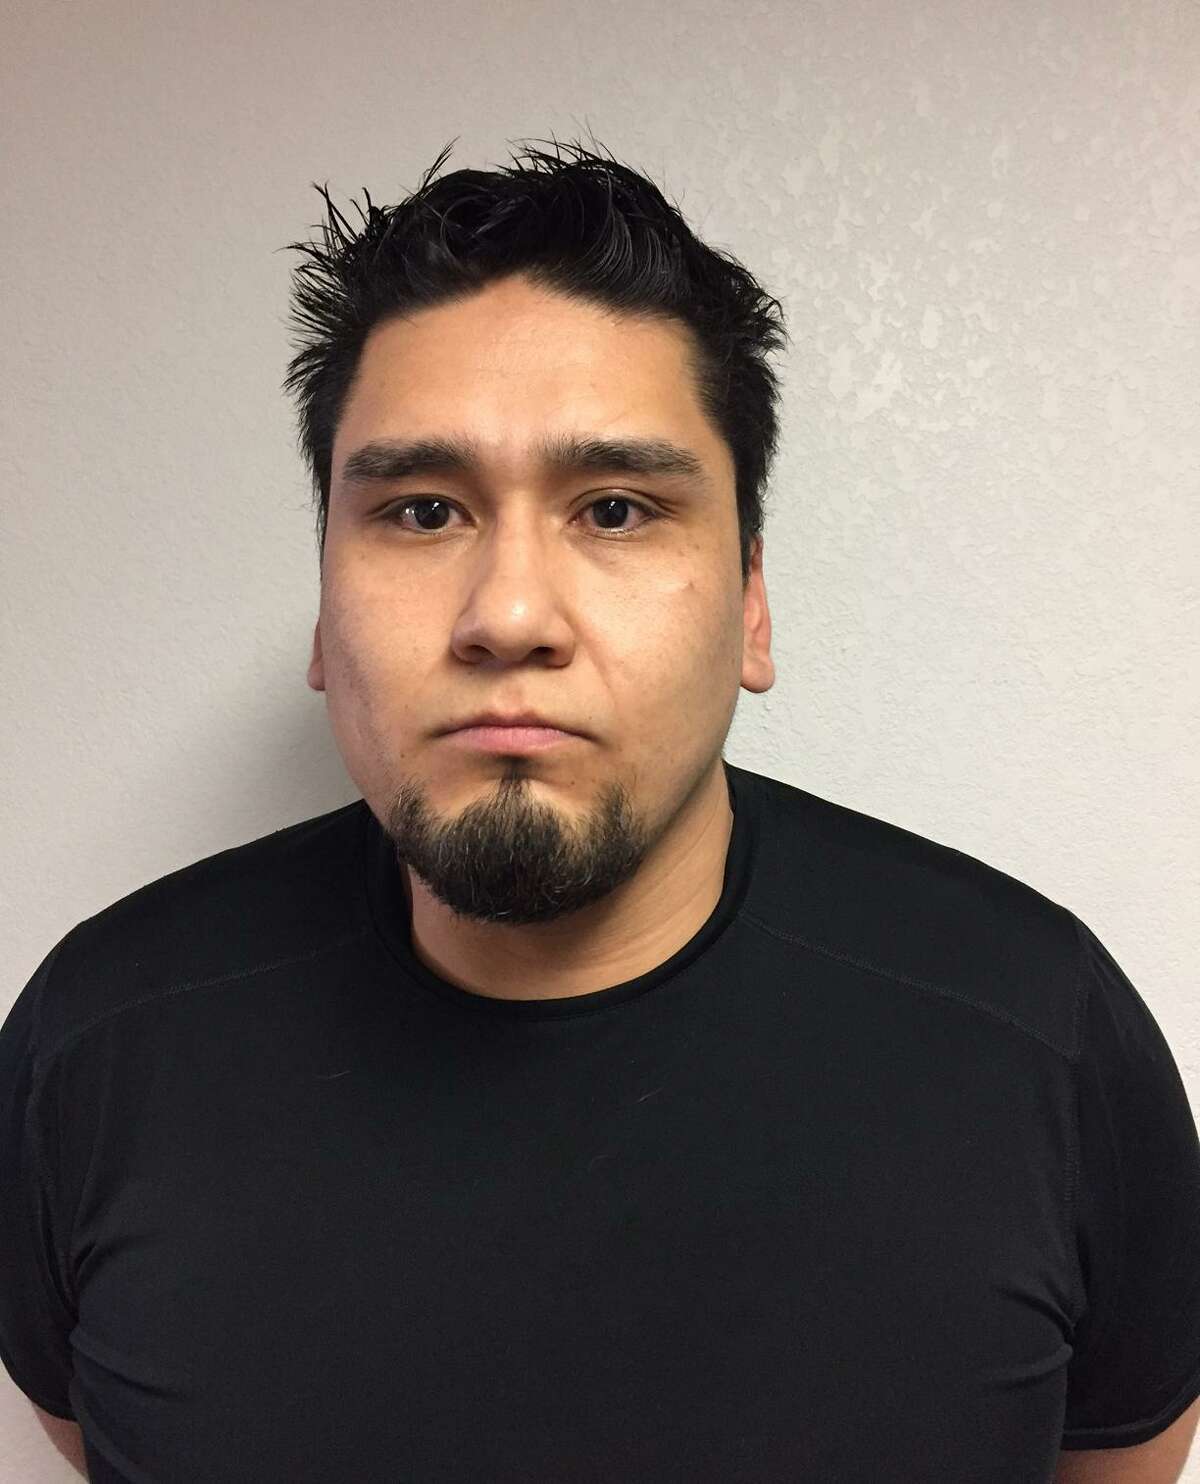 This photo provided by Alpine Police Department shows Robert Fabian. Alpine police Lt. Felipe Fierro says Fabian was arrested Saturday, Feb. 4, 2017, on a charge of tampering with or fabricating physical evidence by concealing a human corpse. Fierro says the arrest is related to last fall's disappearance of Sul Ross State University junior ZuZu Verk of Fort Worth, Texas. Fierro says forensic experts will work to identify remains discovered Friday by a Border Patrol agent in a brushy area near Alpine. (Alpine Police Department via AP)